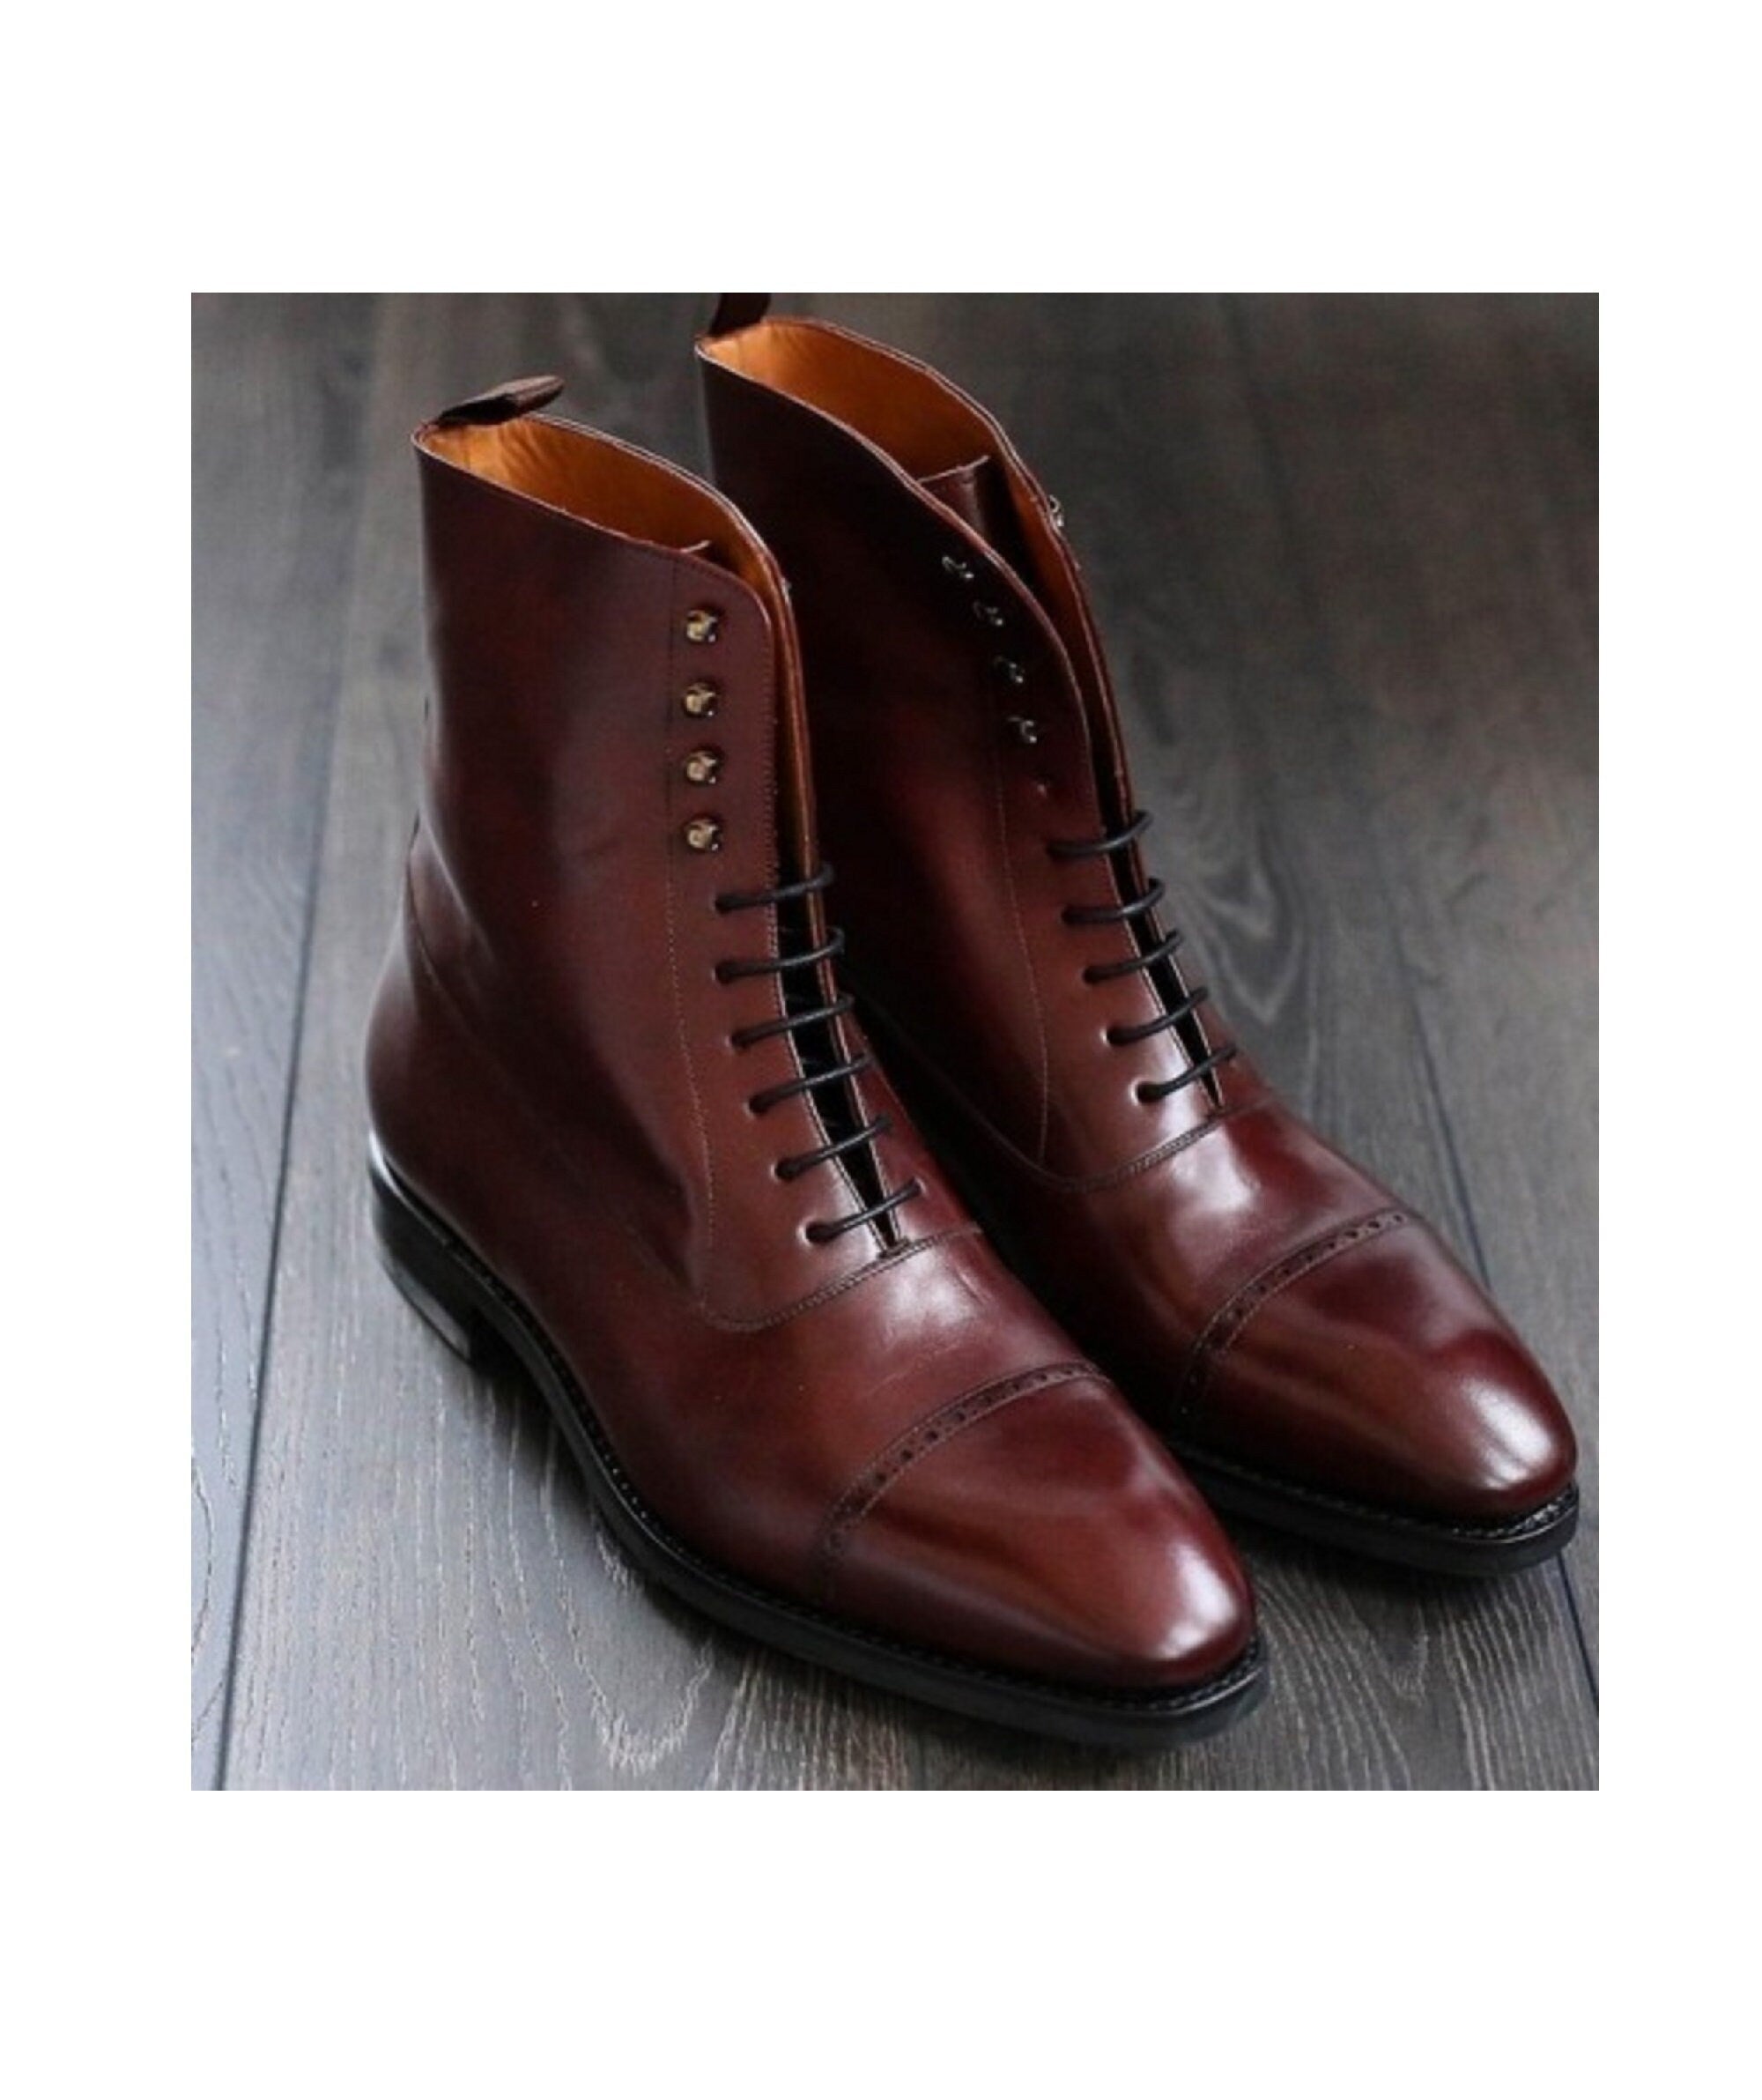 Handmade Men’s Burgundy Color Lace Up Boots, Leather Ankle High Cap Toe Boots